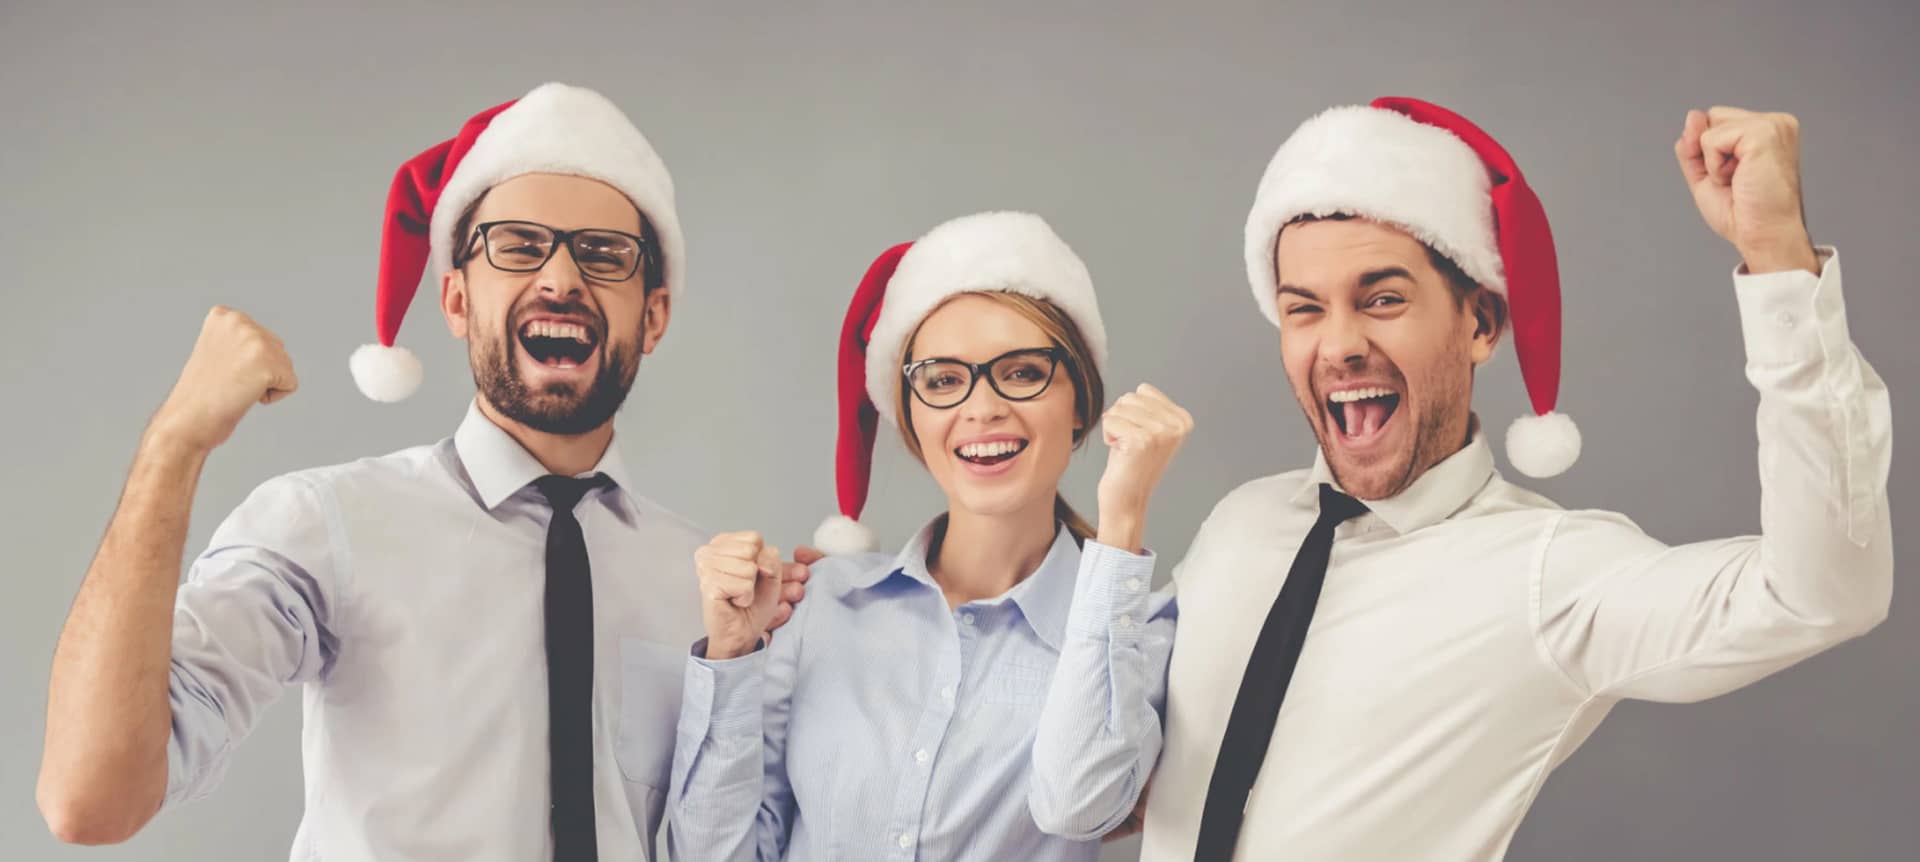 Hiring for The Holiday Season? Here are 12 Things Talent Acquisition Teams Should Keep in Mind